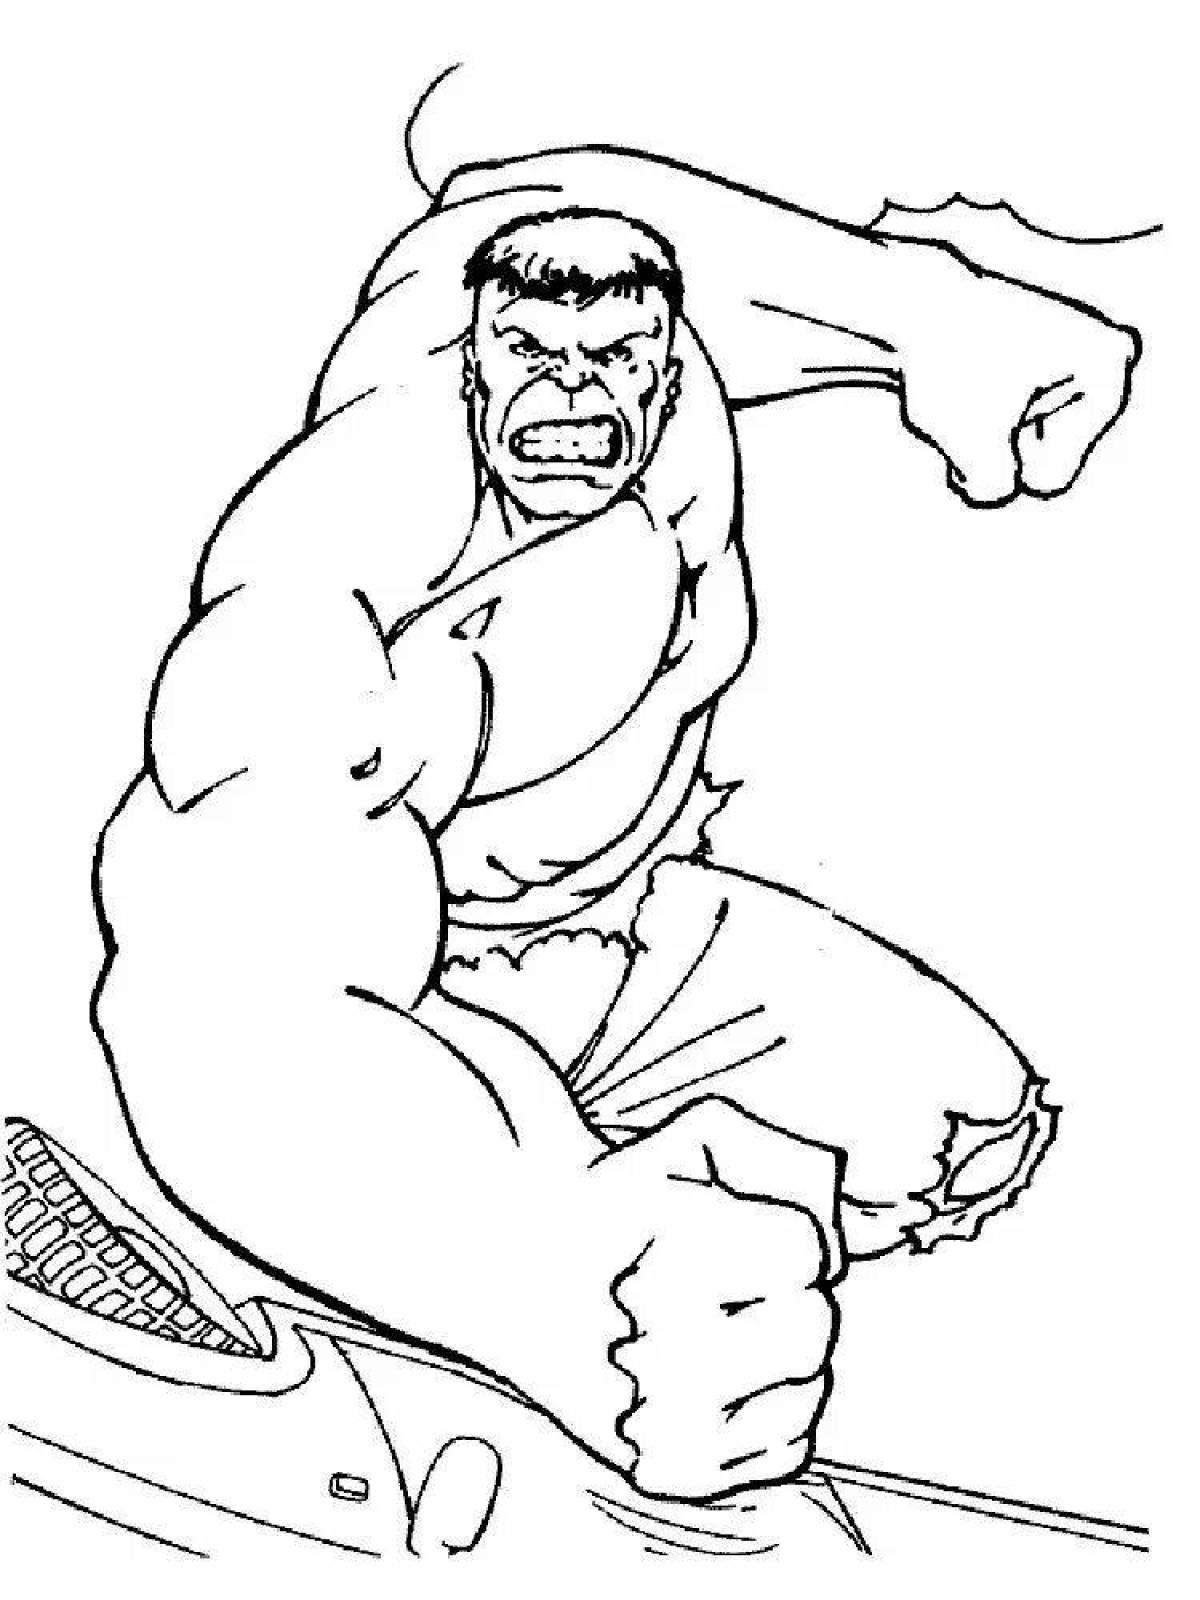 Humorous Hulk coloring book for kids 6-7 years old